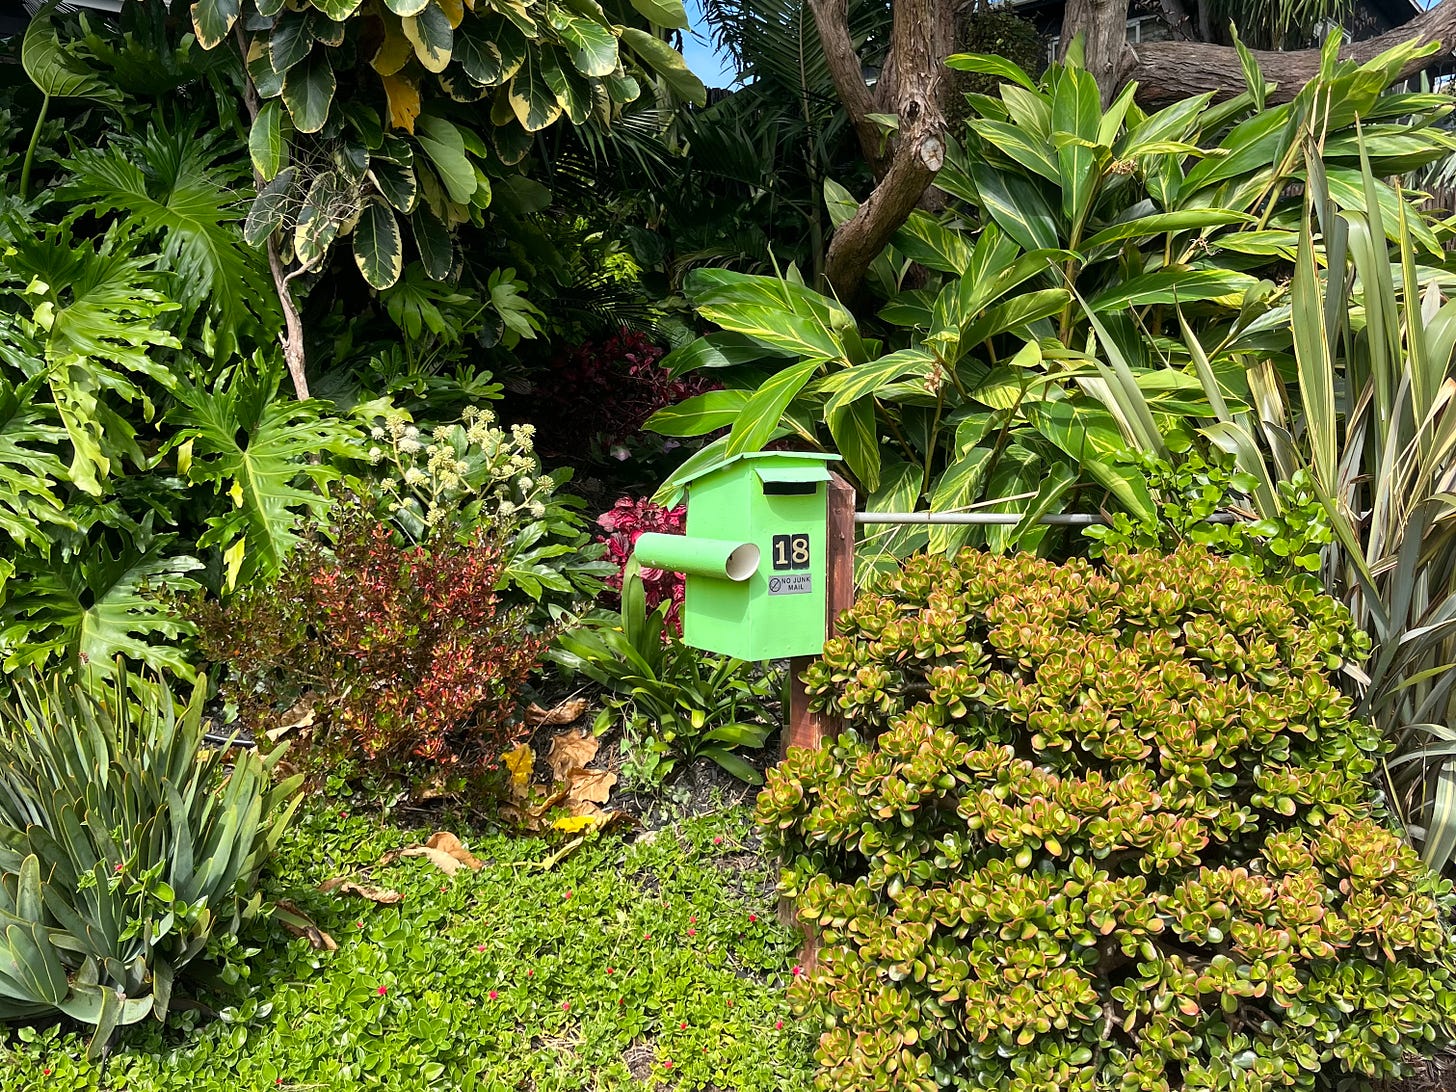 A photograph of a kermit-green letterbox (number 18) surrounded by sub-tropical green foliage